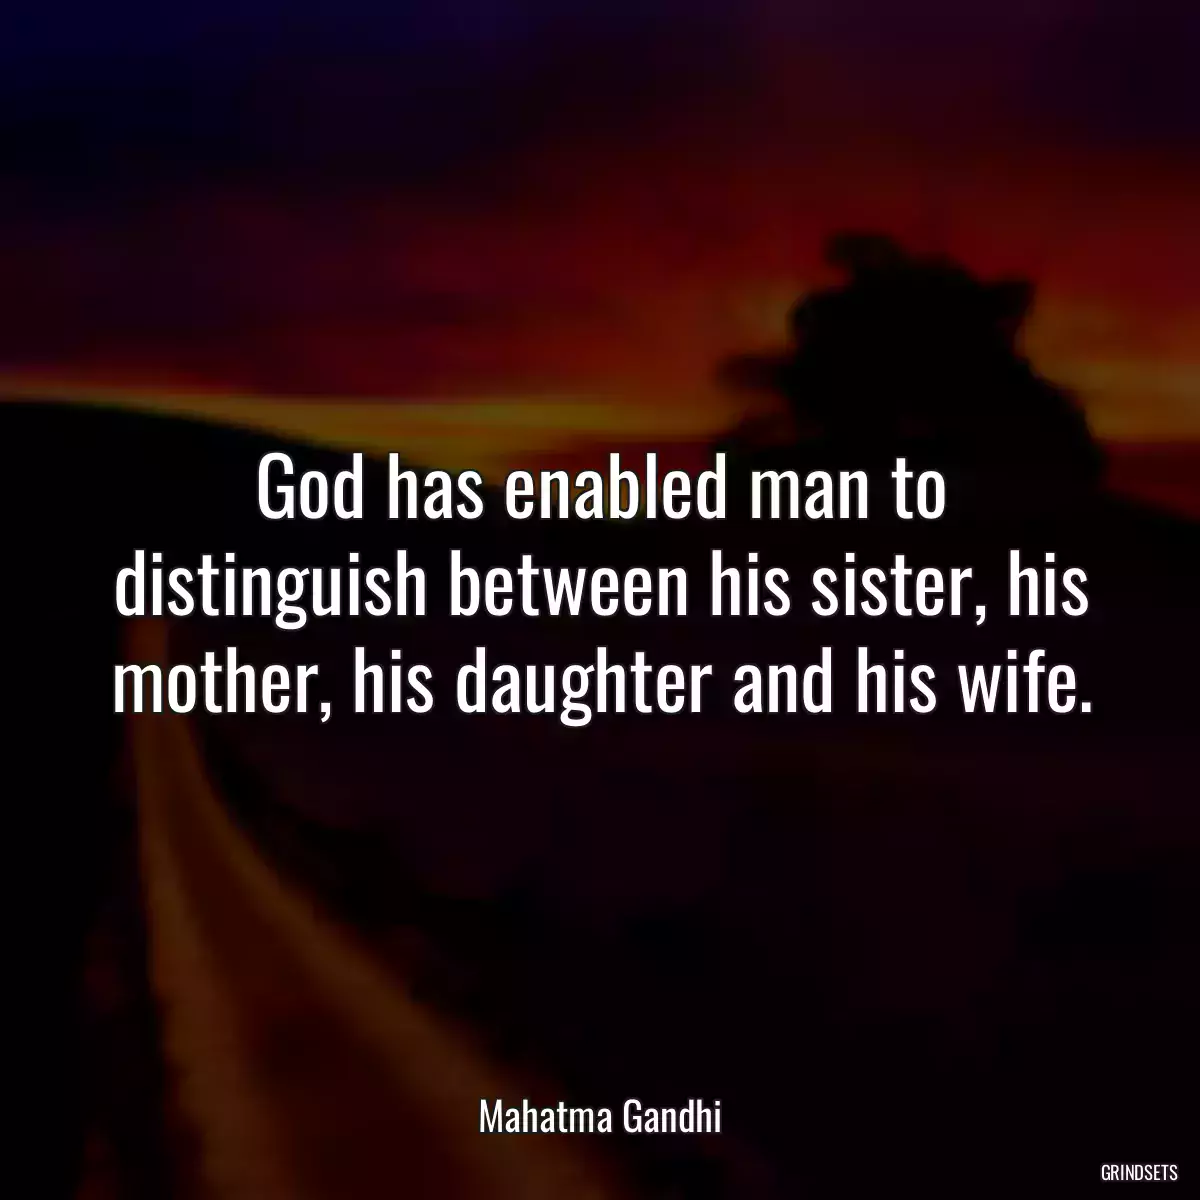 God has enabled man to distinguish between his sister, his mother, his daughter and his wife.